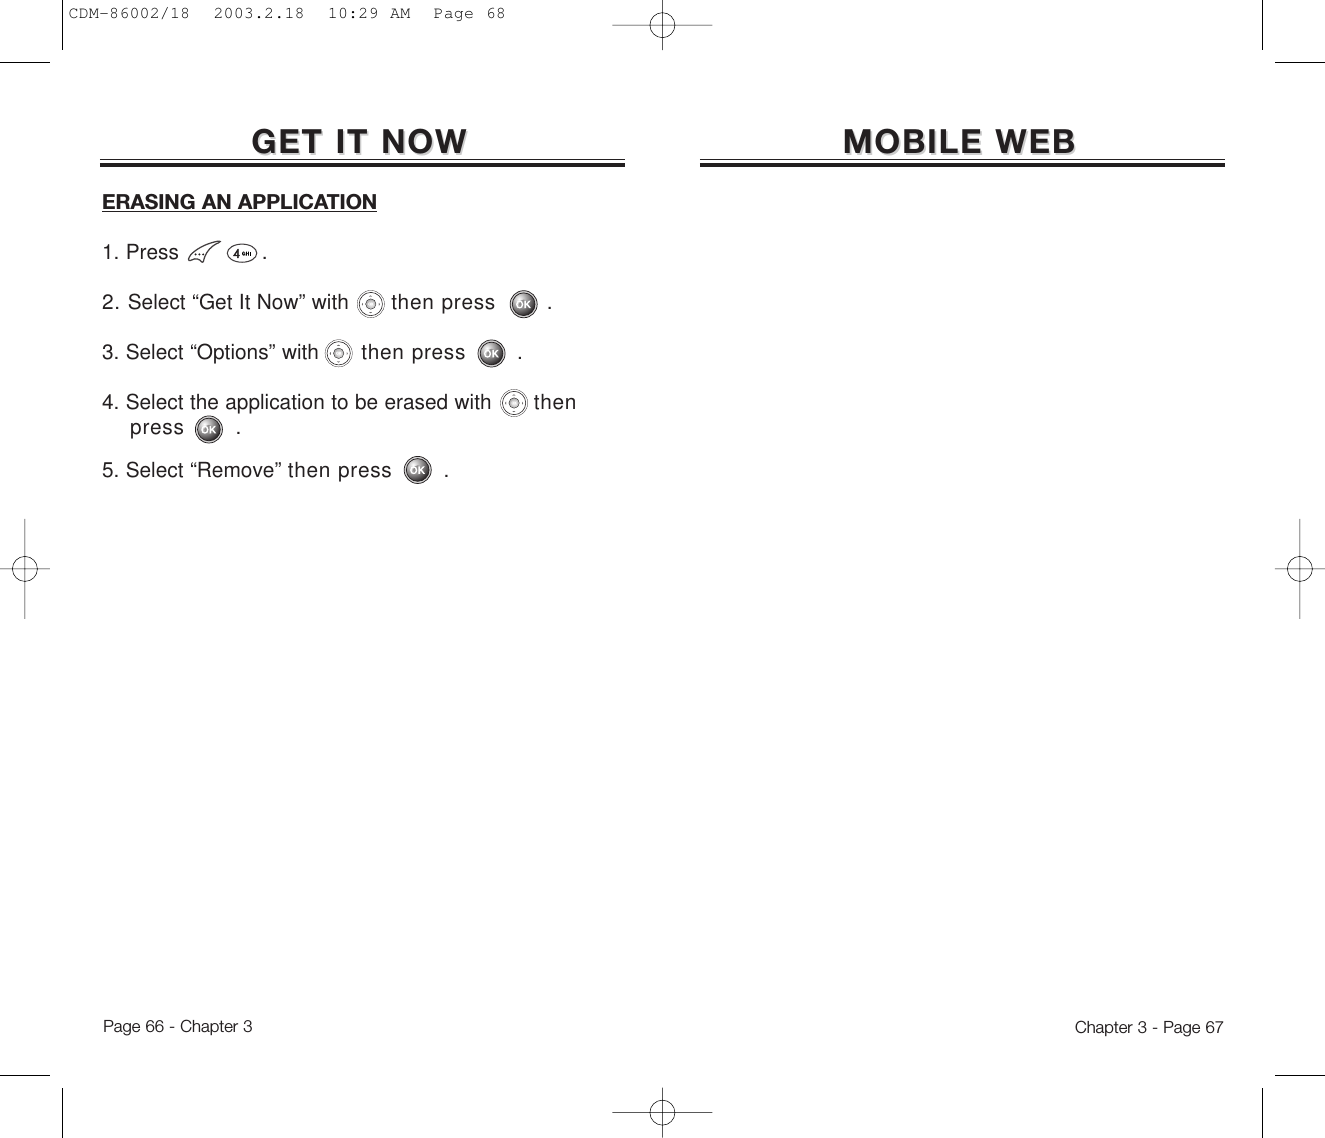 MOBILE WEBMOBILE WEBGET IT NOWGET IT NOWChapter 3 - Page 67Page 66 - Chapter 3ERASING AN APPLICATION1. Press .2. Select “Get It Now” with then press .3. Select “Options” with then press .4. Select the application to be erased with then press .5. Select “Remove” then press .CDM-86002/18  2003.2.18  10:29 AM  Page 68